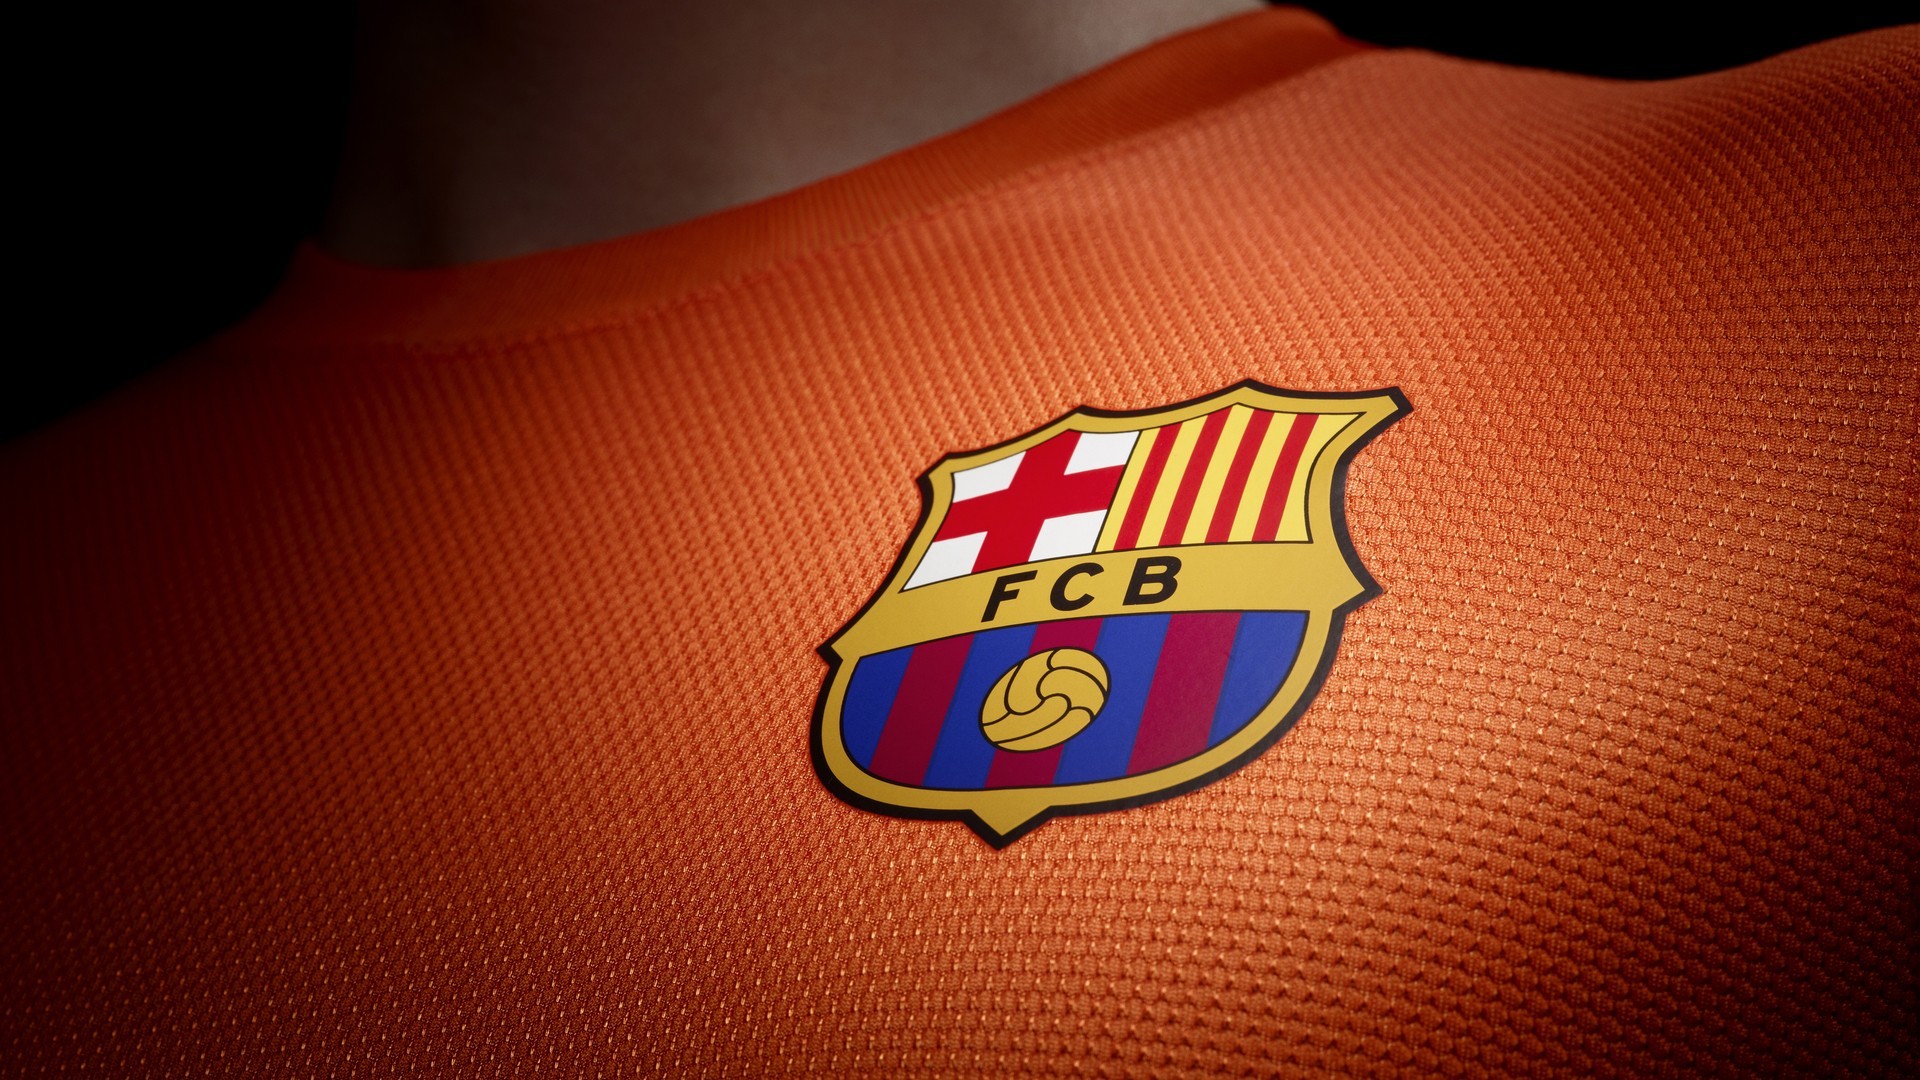 FC Barcelona wallpaper ·① Download free wallpapers for desktop and ...